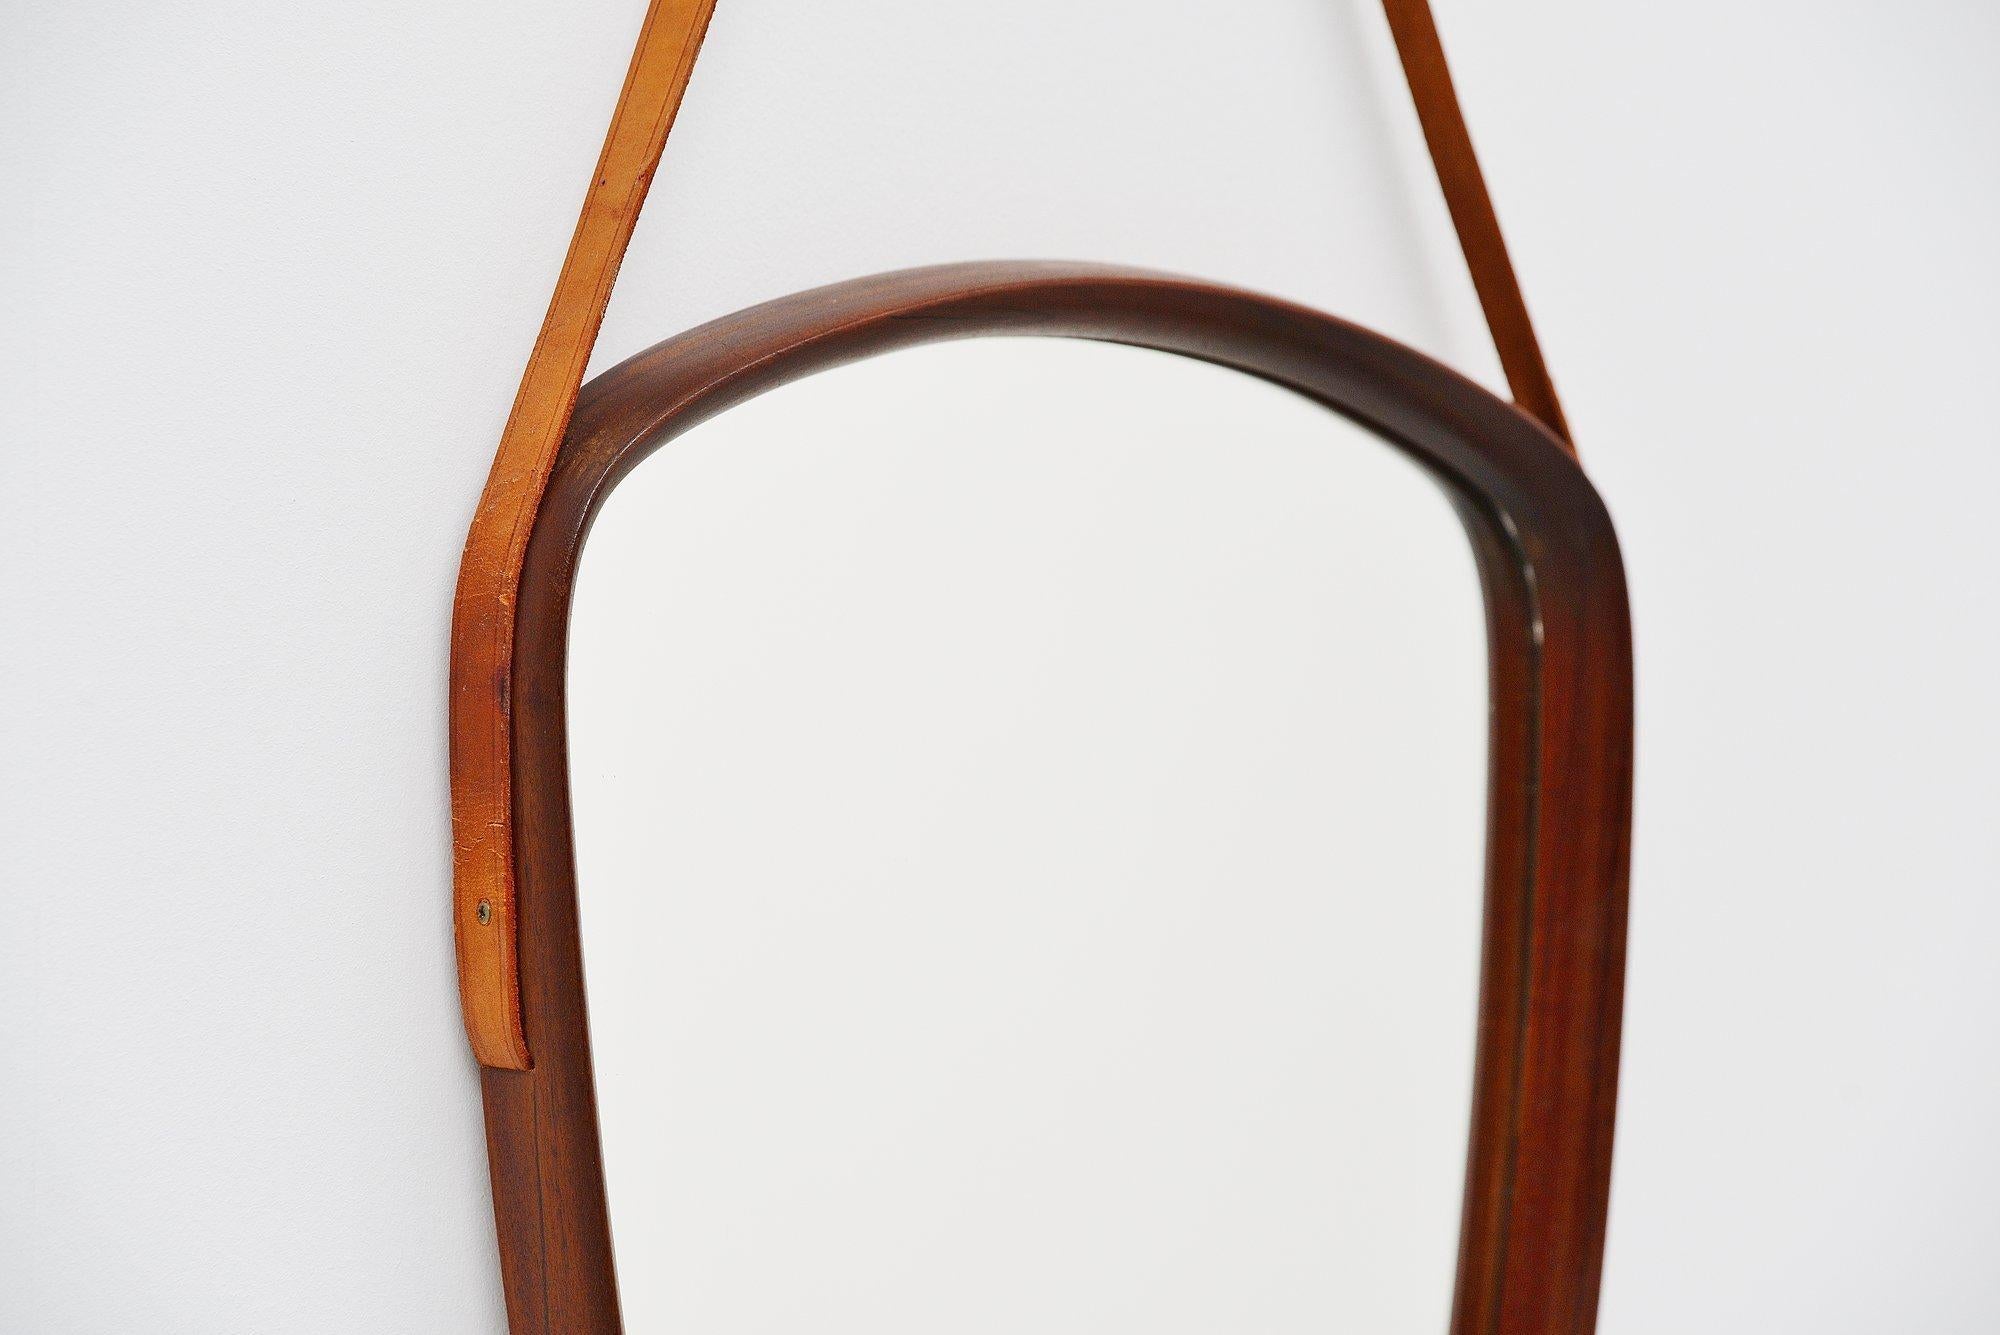 Very nice shaped wall mirror designed by Uno and Osten Kristiansson and manufactured by Luxus, Sweden 1960. The mirror has a rosewood rim and natural leather strap to hang it. Very nice and unusual shape and in very good original condition. Easy to